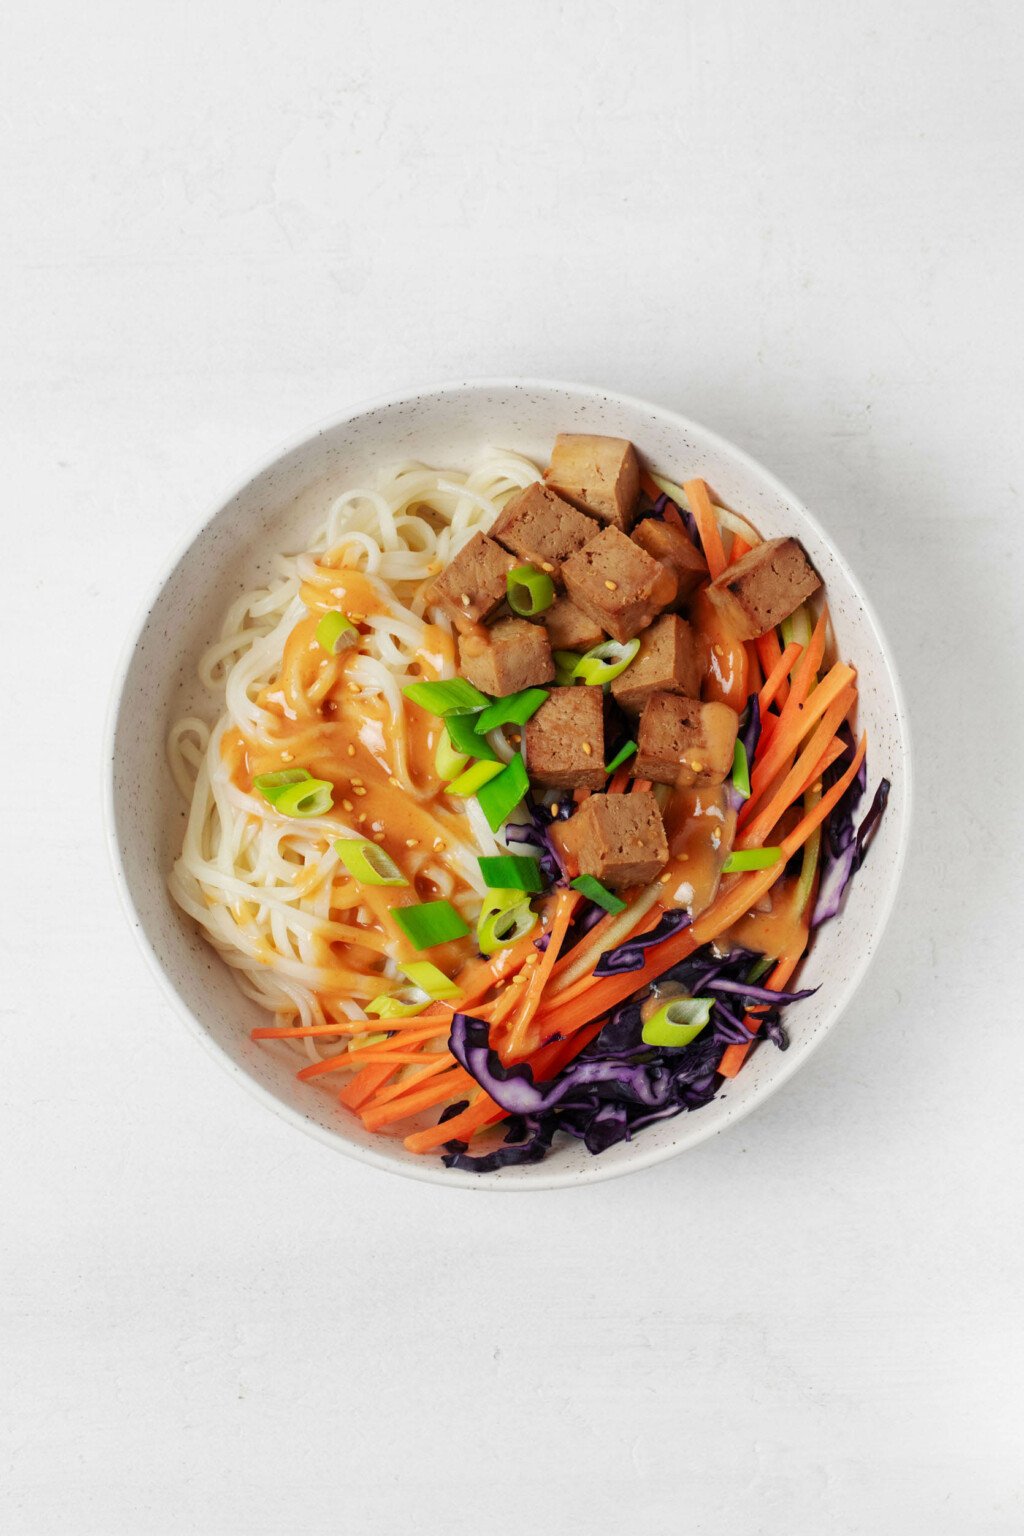 An overhead image of a white bowl filled with cooked noodles, raw carrot and red cabbage, tofu, and a sauce. 